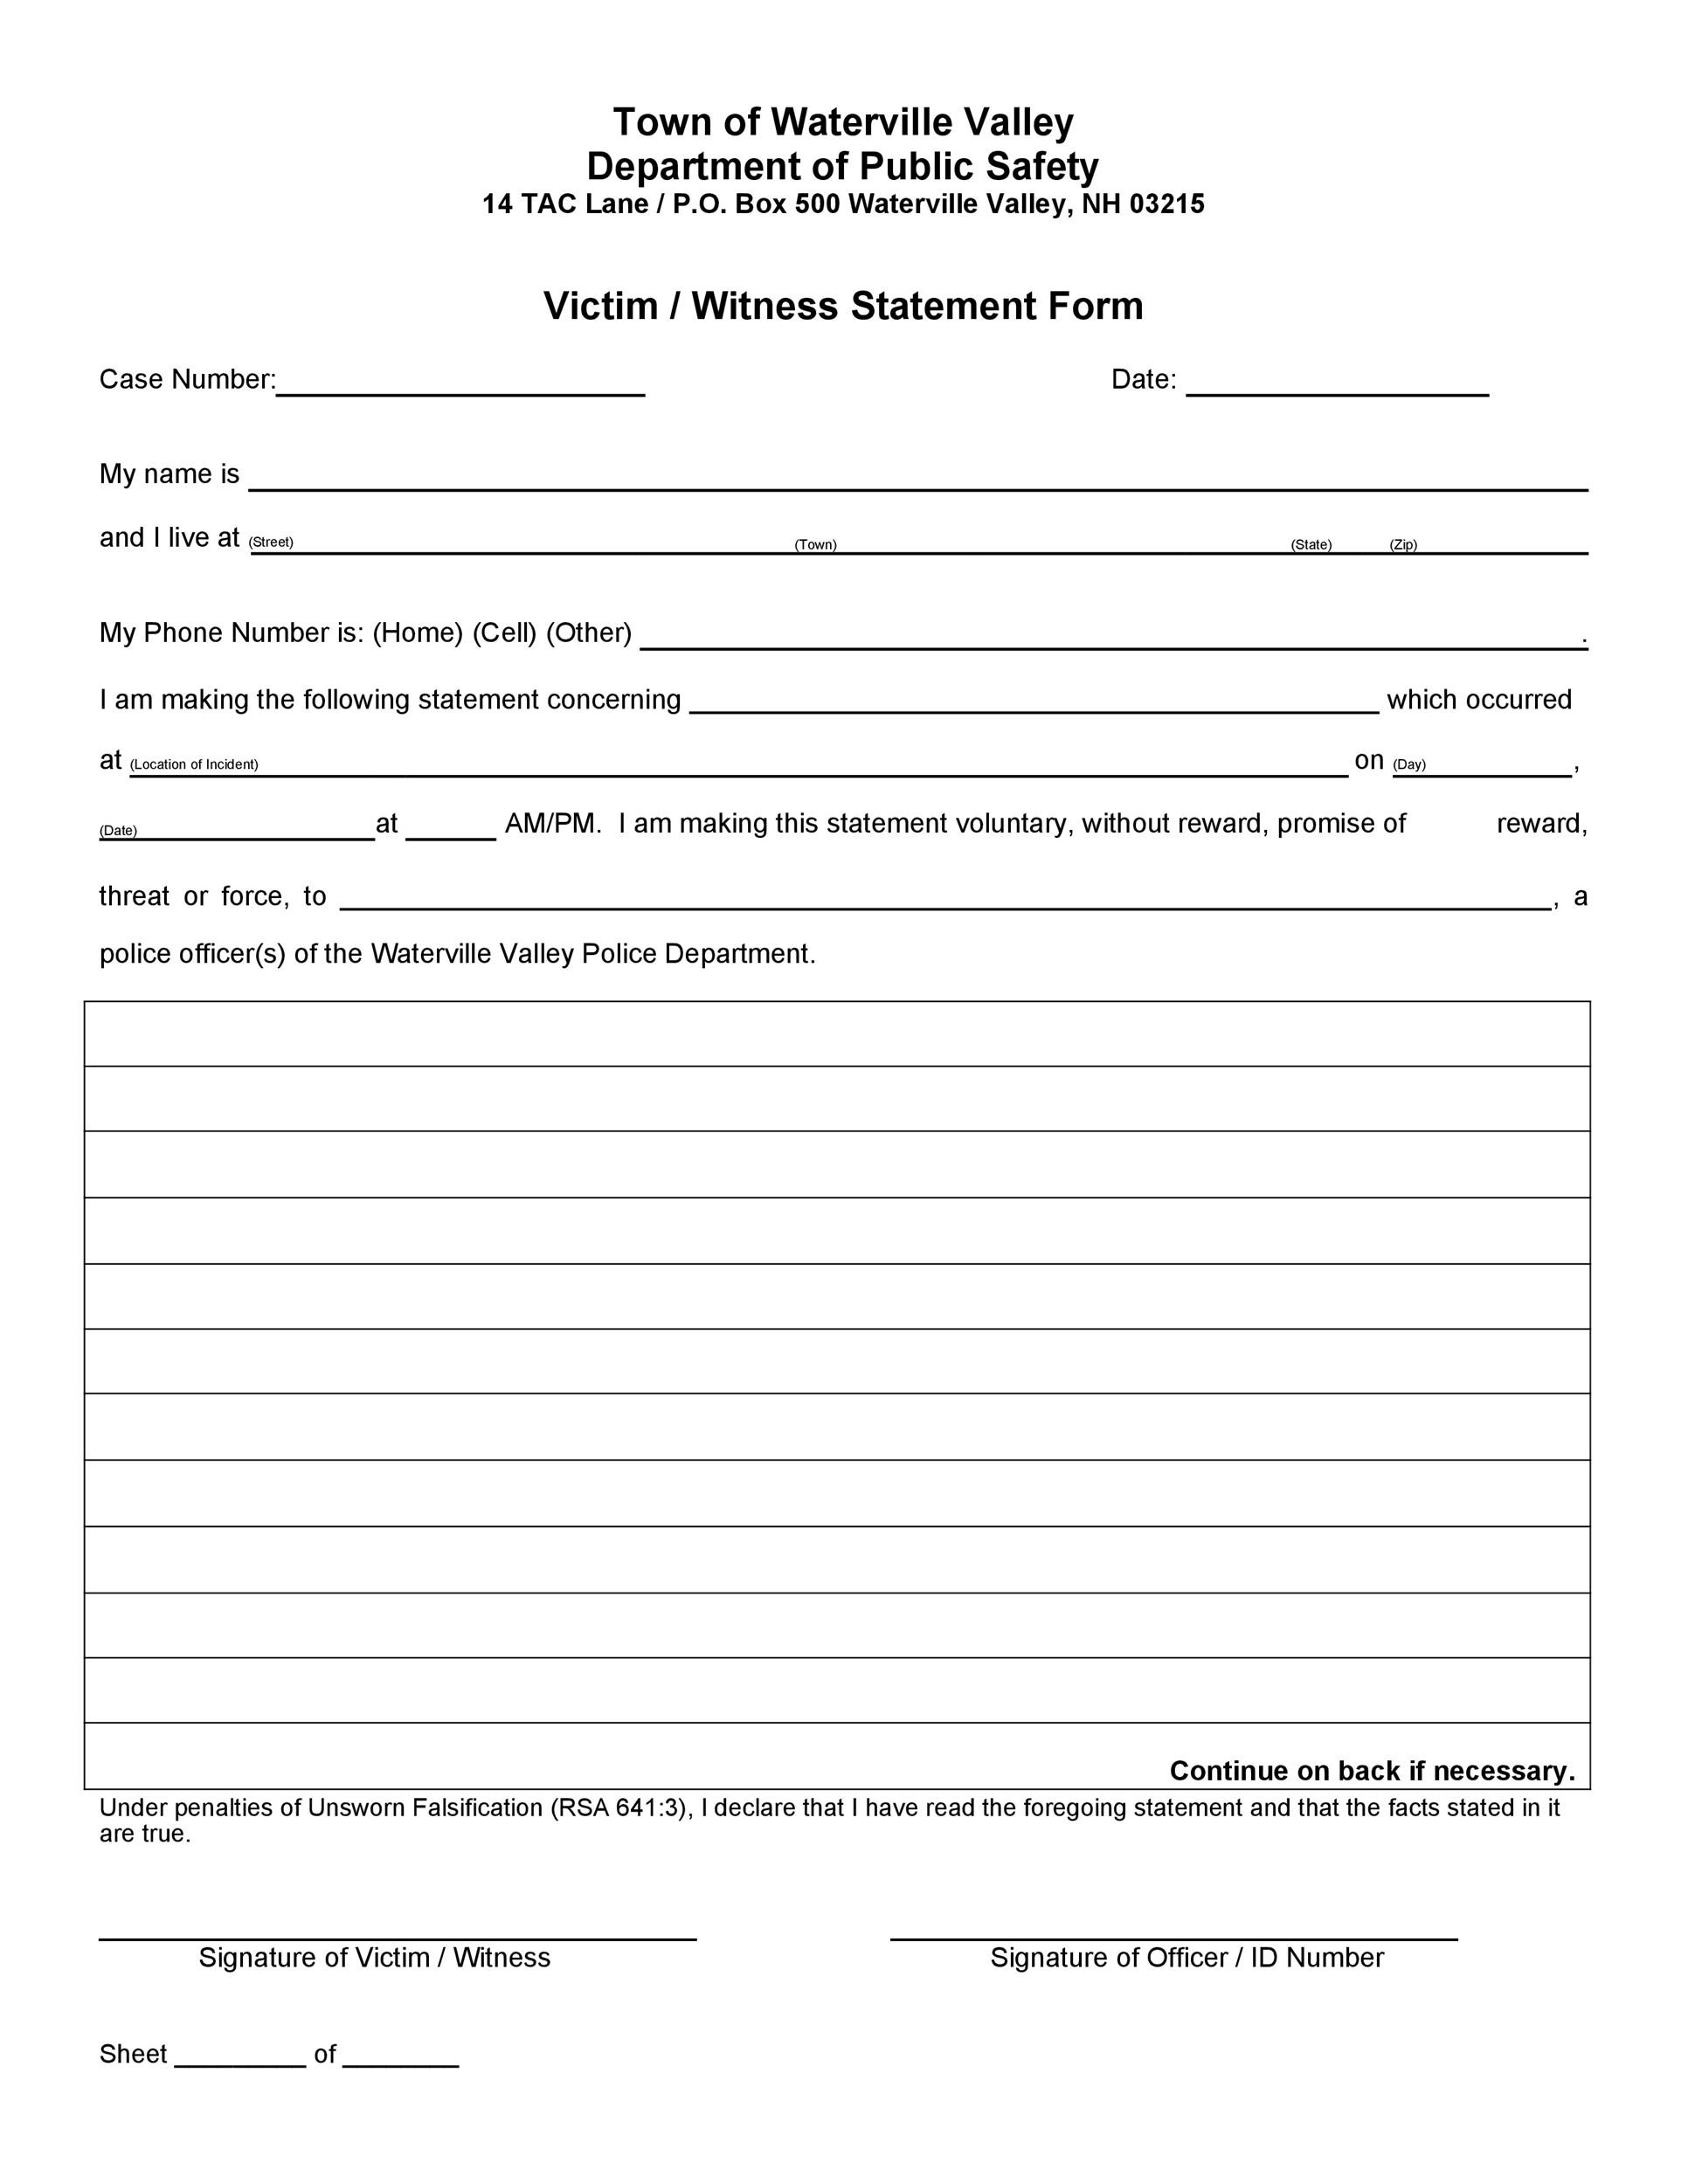 24 Professional Witness Statement Forms & Templates ᐅ TemplateLab